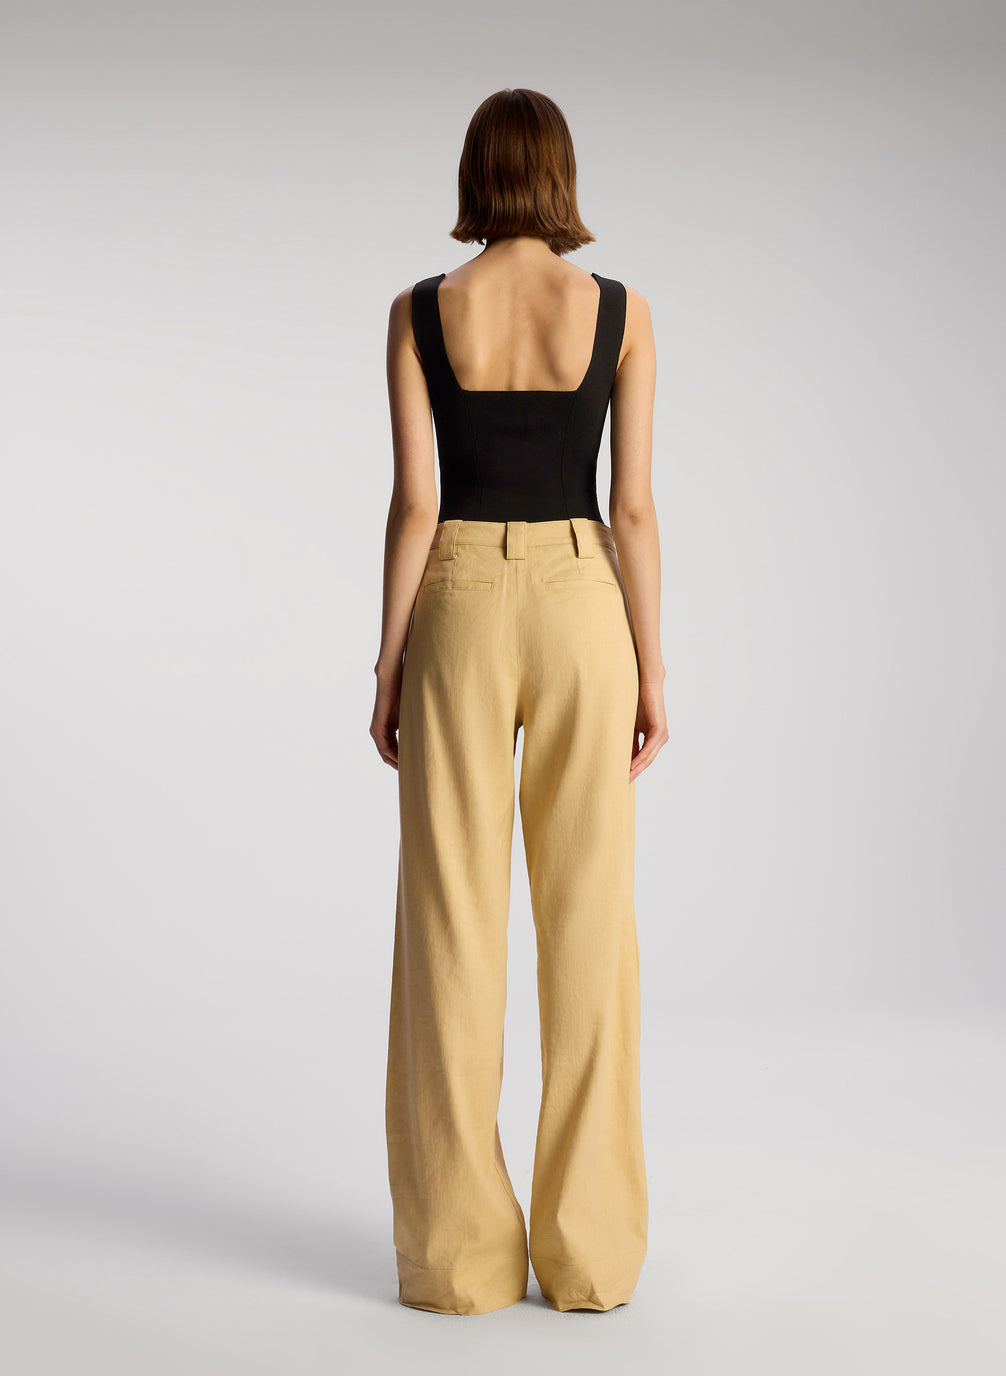 back view of woman wearing black sleeveless compact knit top and tan pants